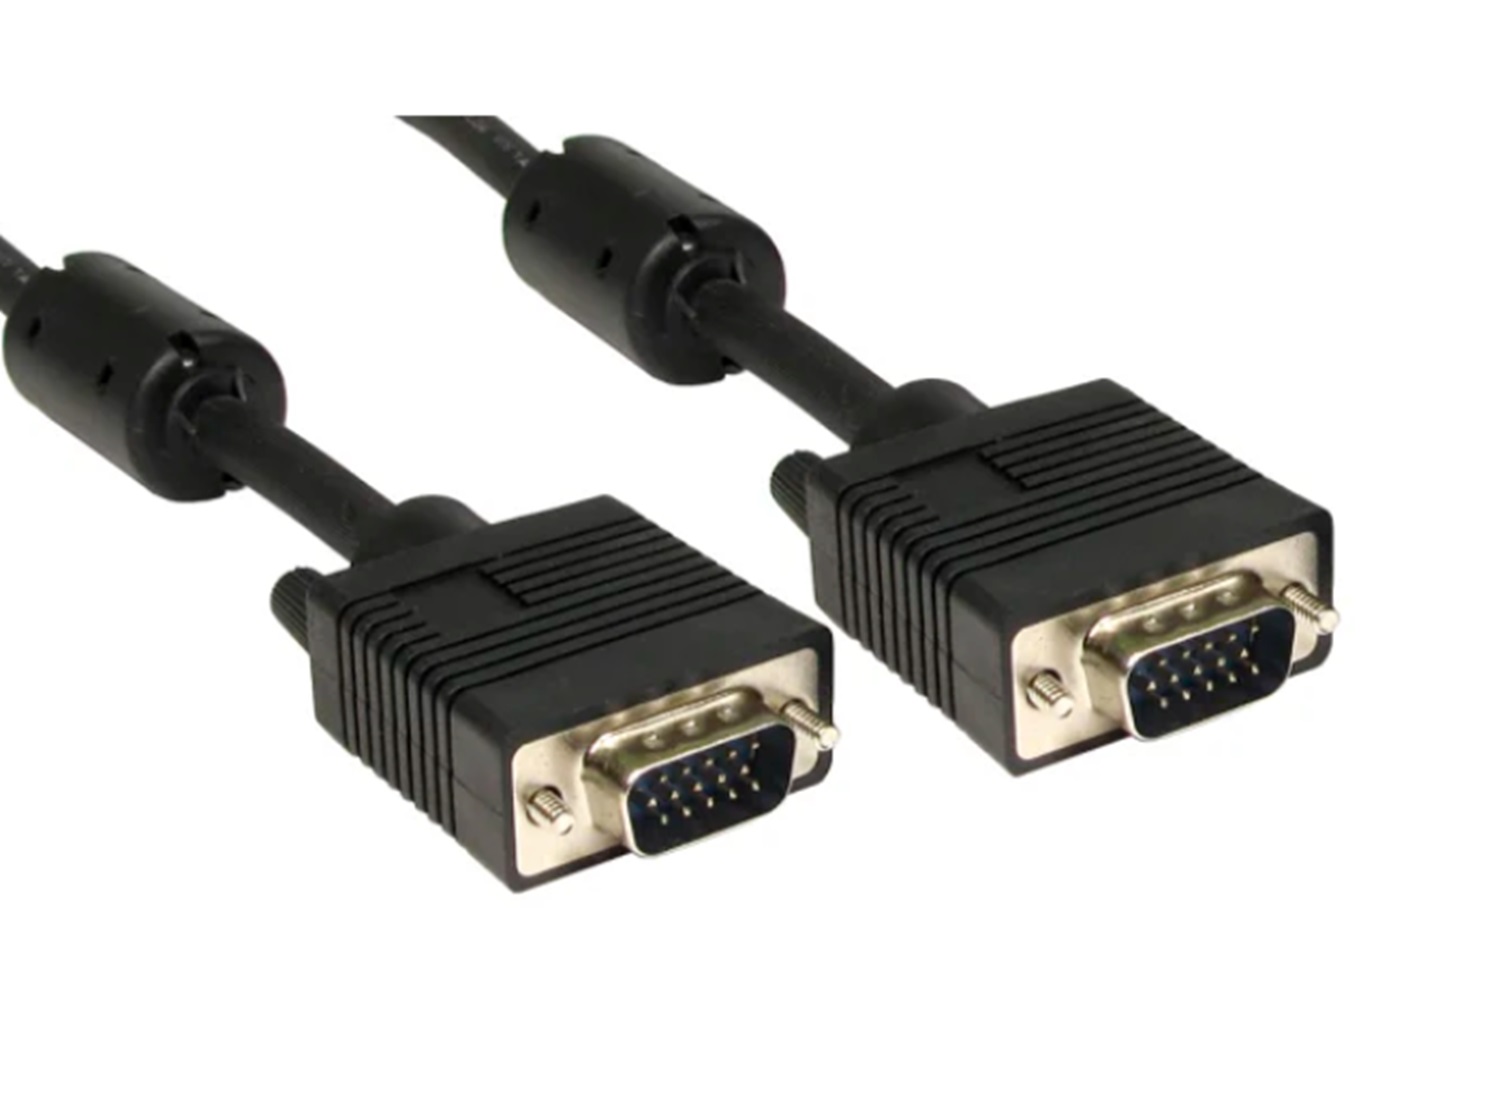 vga cable example